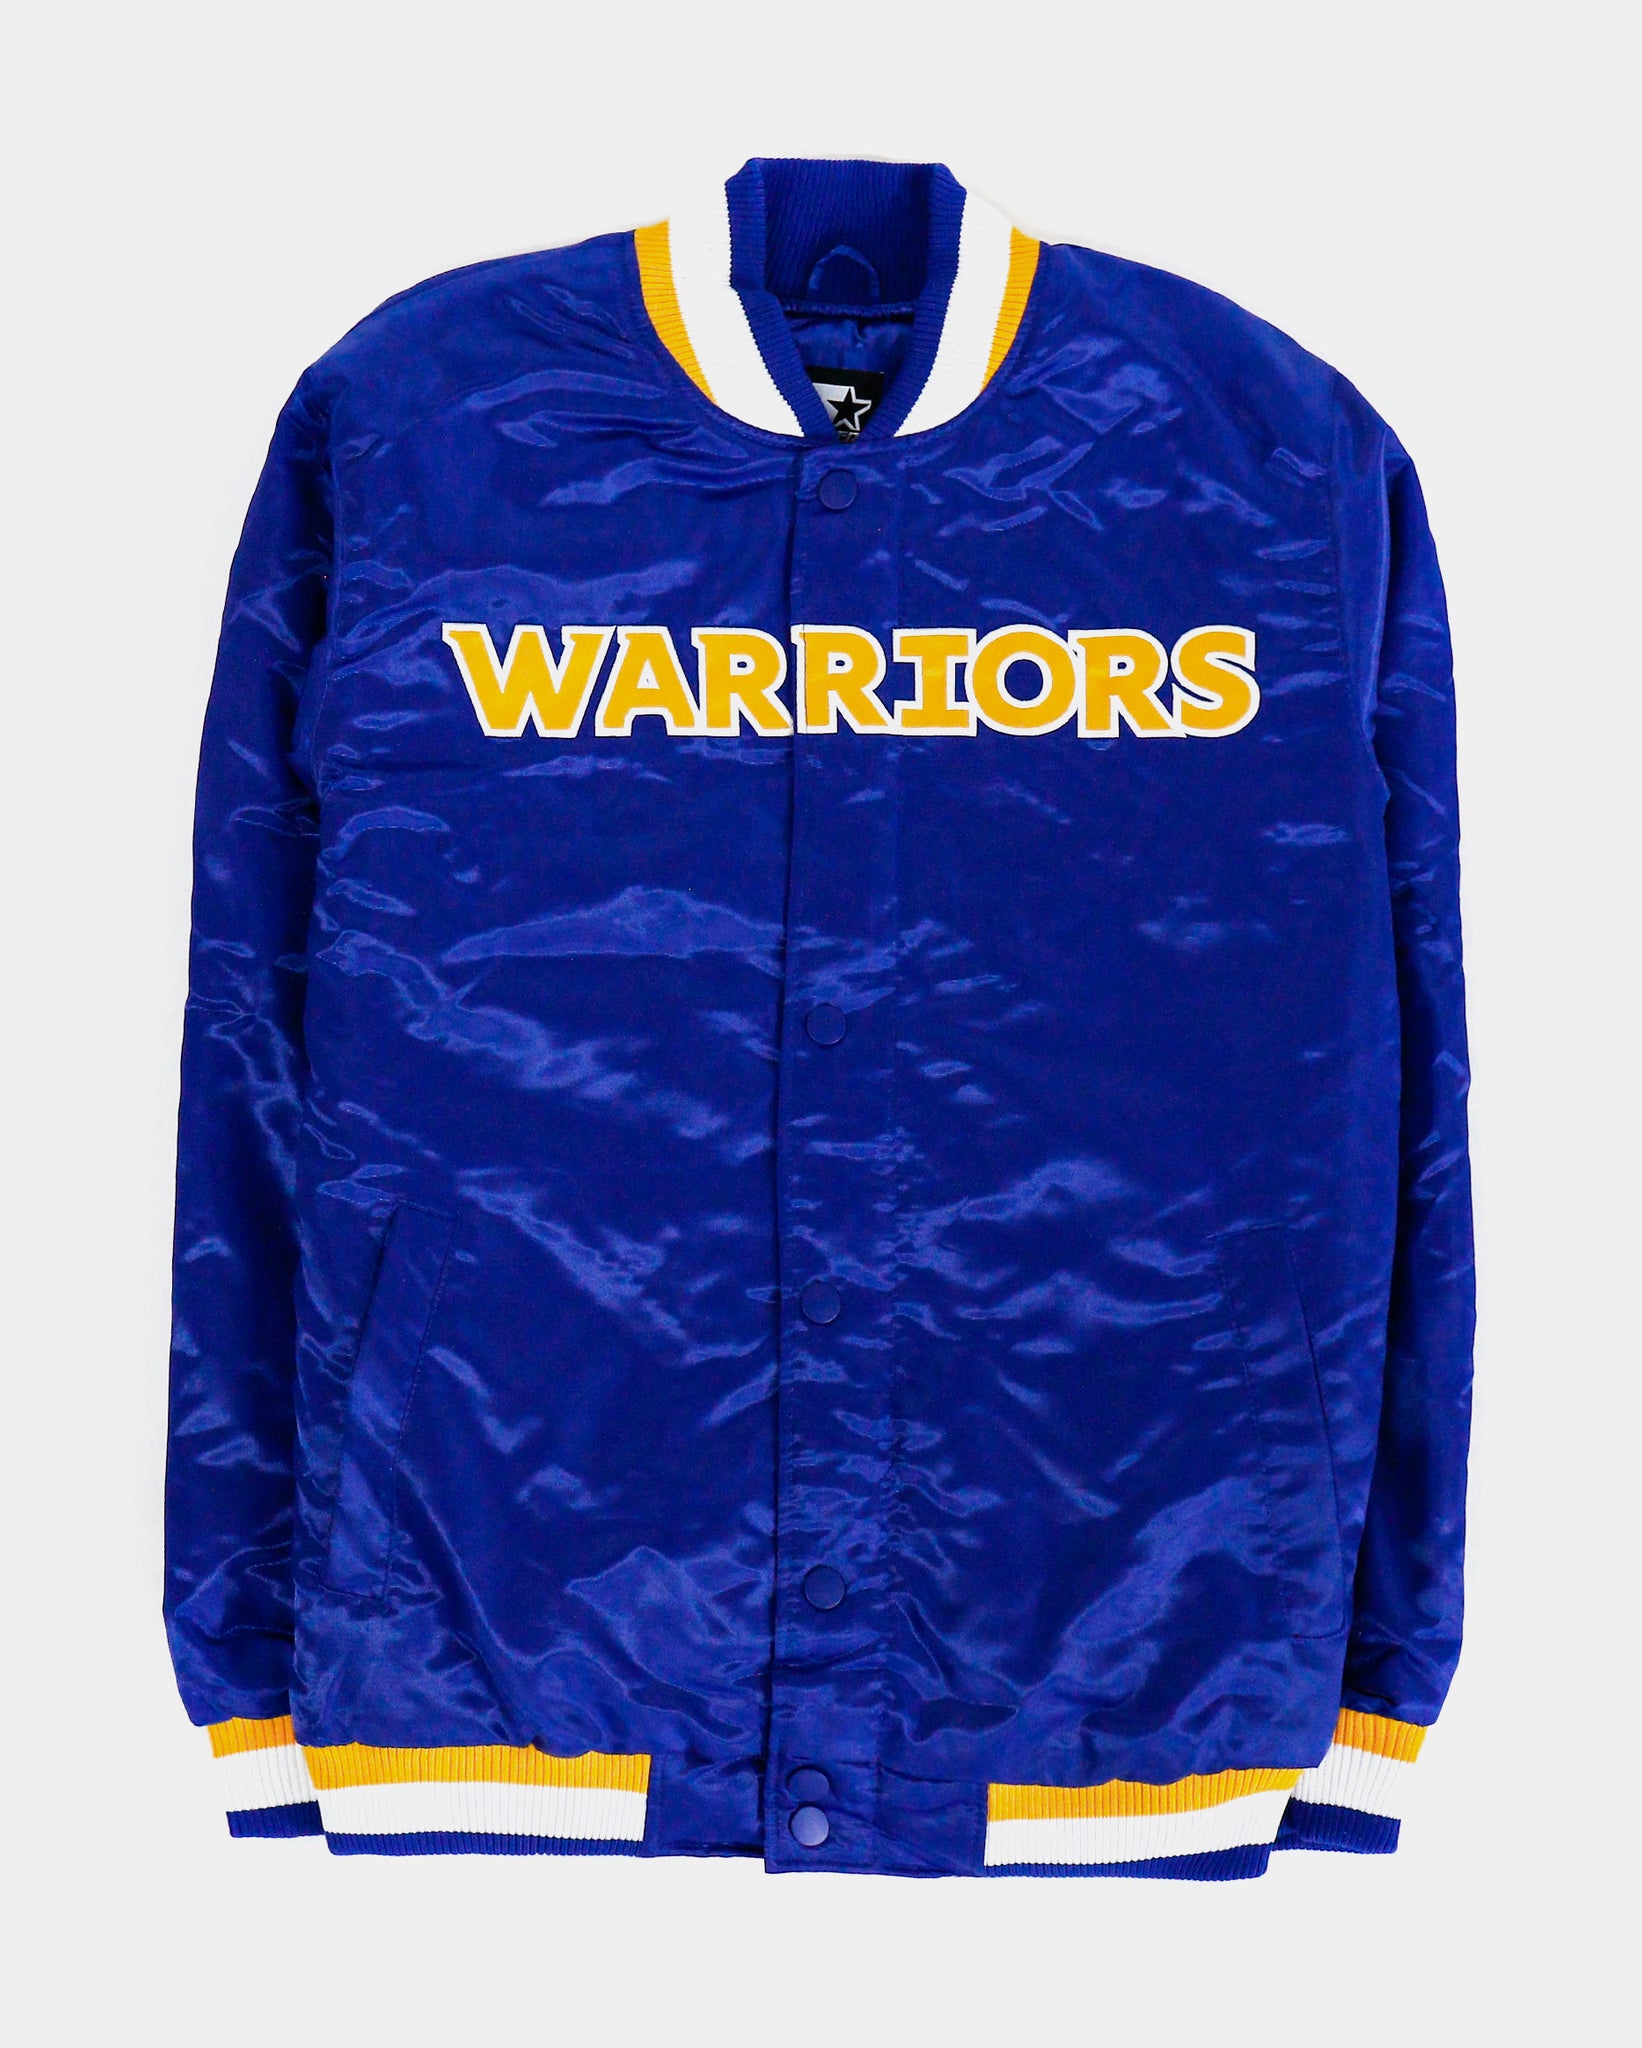 Starter Shoe Palace Exclusive Golden State Warriors Mens Jacket